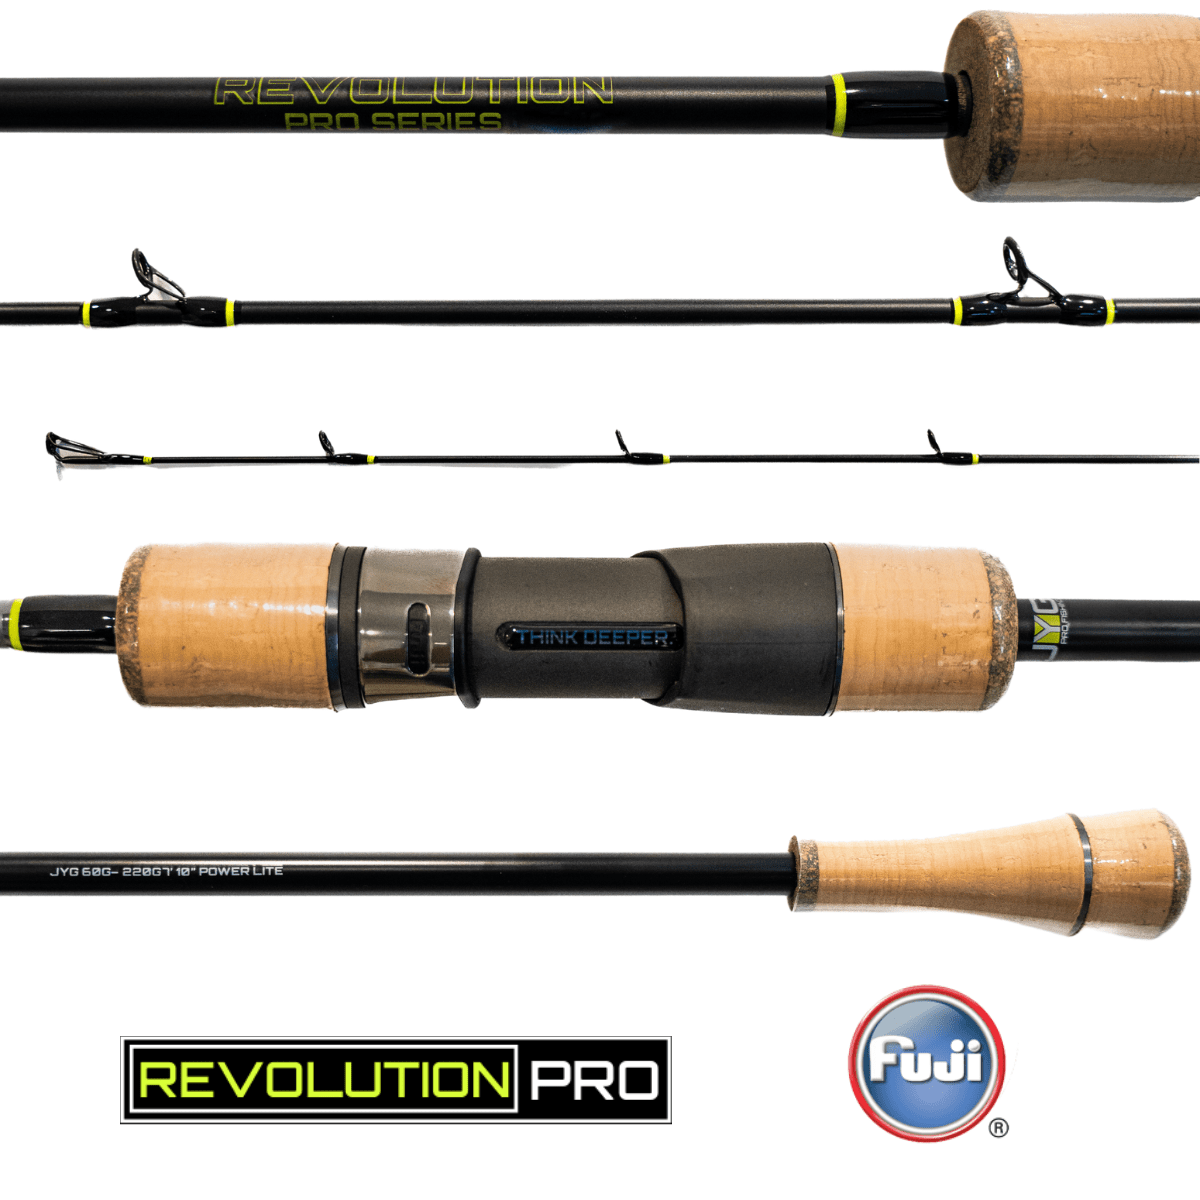 JYG Pro Revolution Pro Series Long 7ft10in Slow Pitch Jigging Rod (Limited Edition) Size 60g | Chaos Fishing